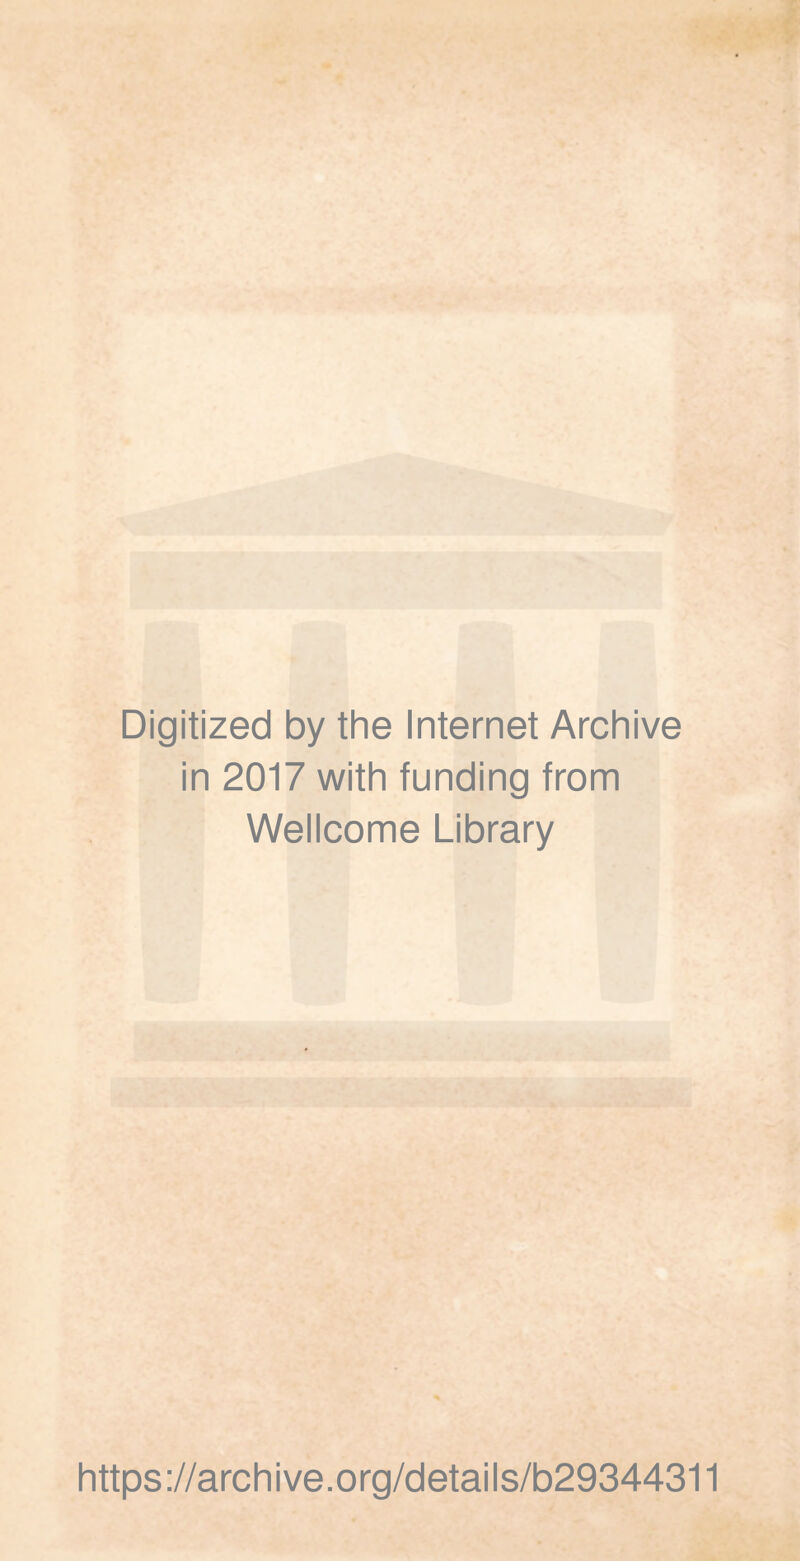 Digitized by the Internet Archive in 2017 with funding from Wellcome Library https ://arch i ve. o rg/detai Is/b29344311